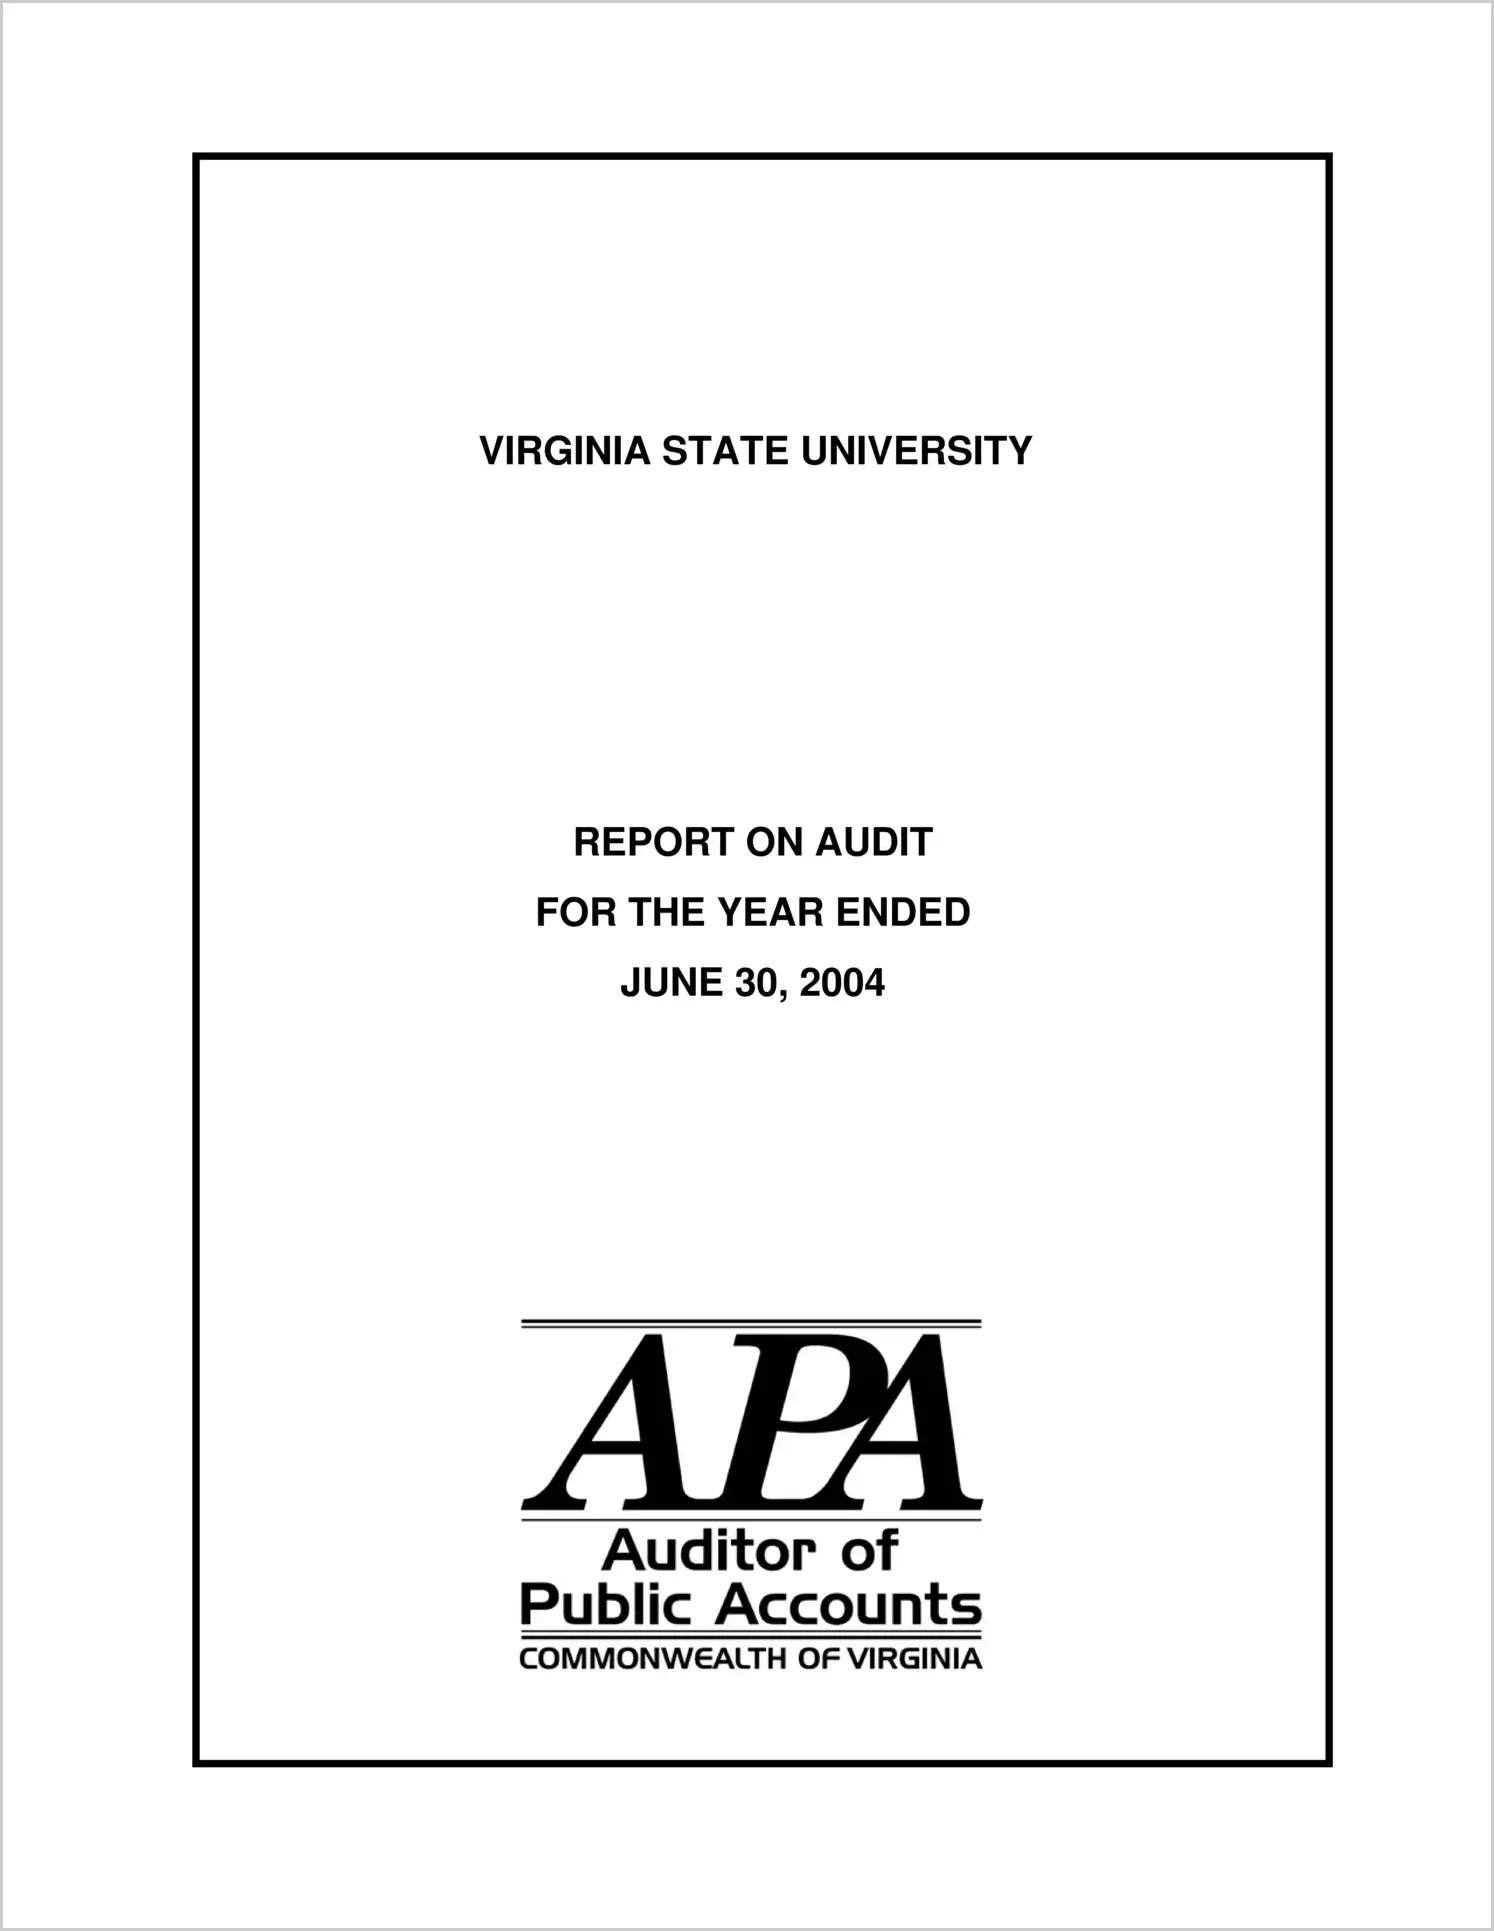 Virginia State University for the year ended June 30, 2004